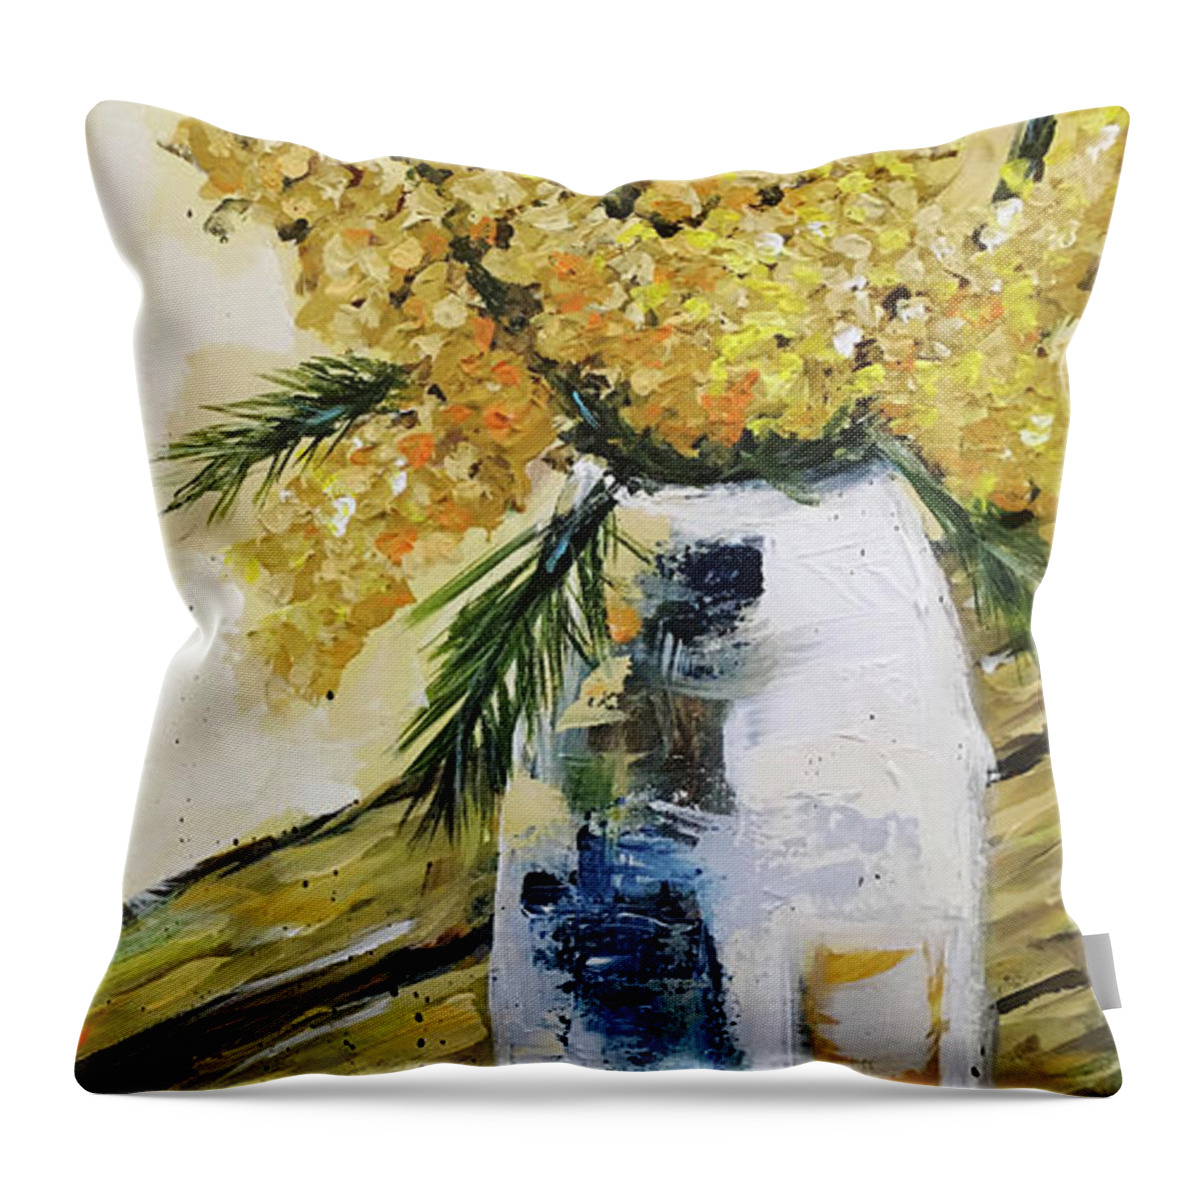 Flowers Throw Pillow featuring the painting Yellow Bunch by Roxy Rich